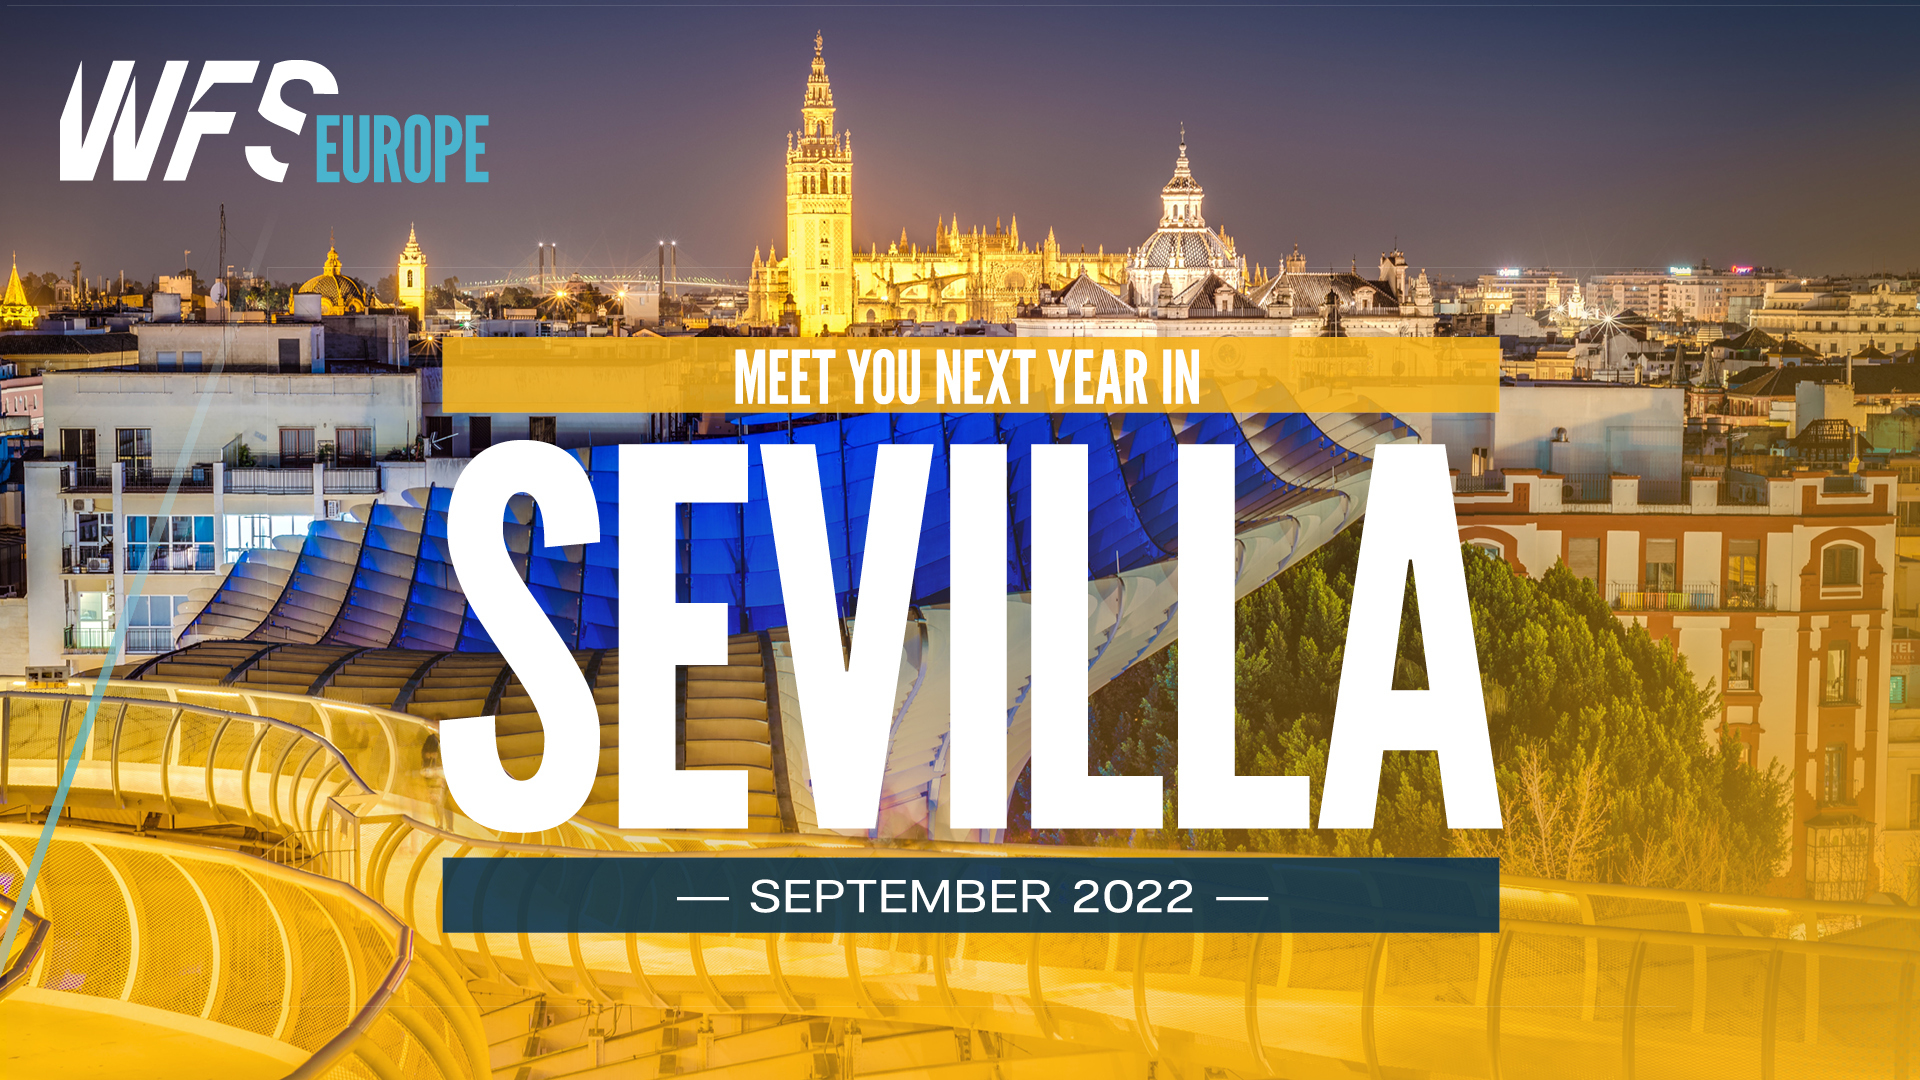 WFS Europe is heading to Sevilla in 2022.